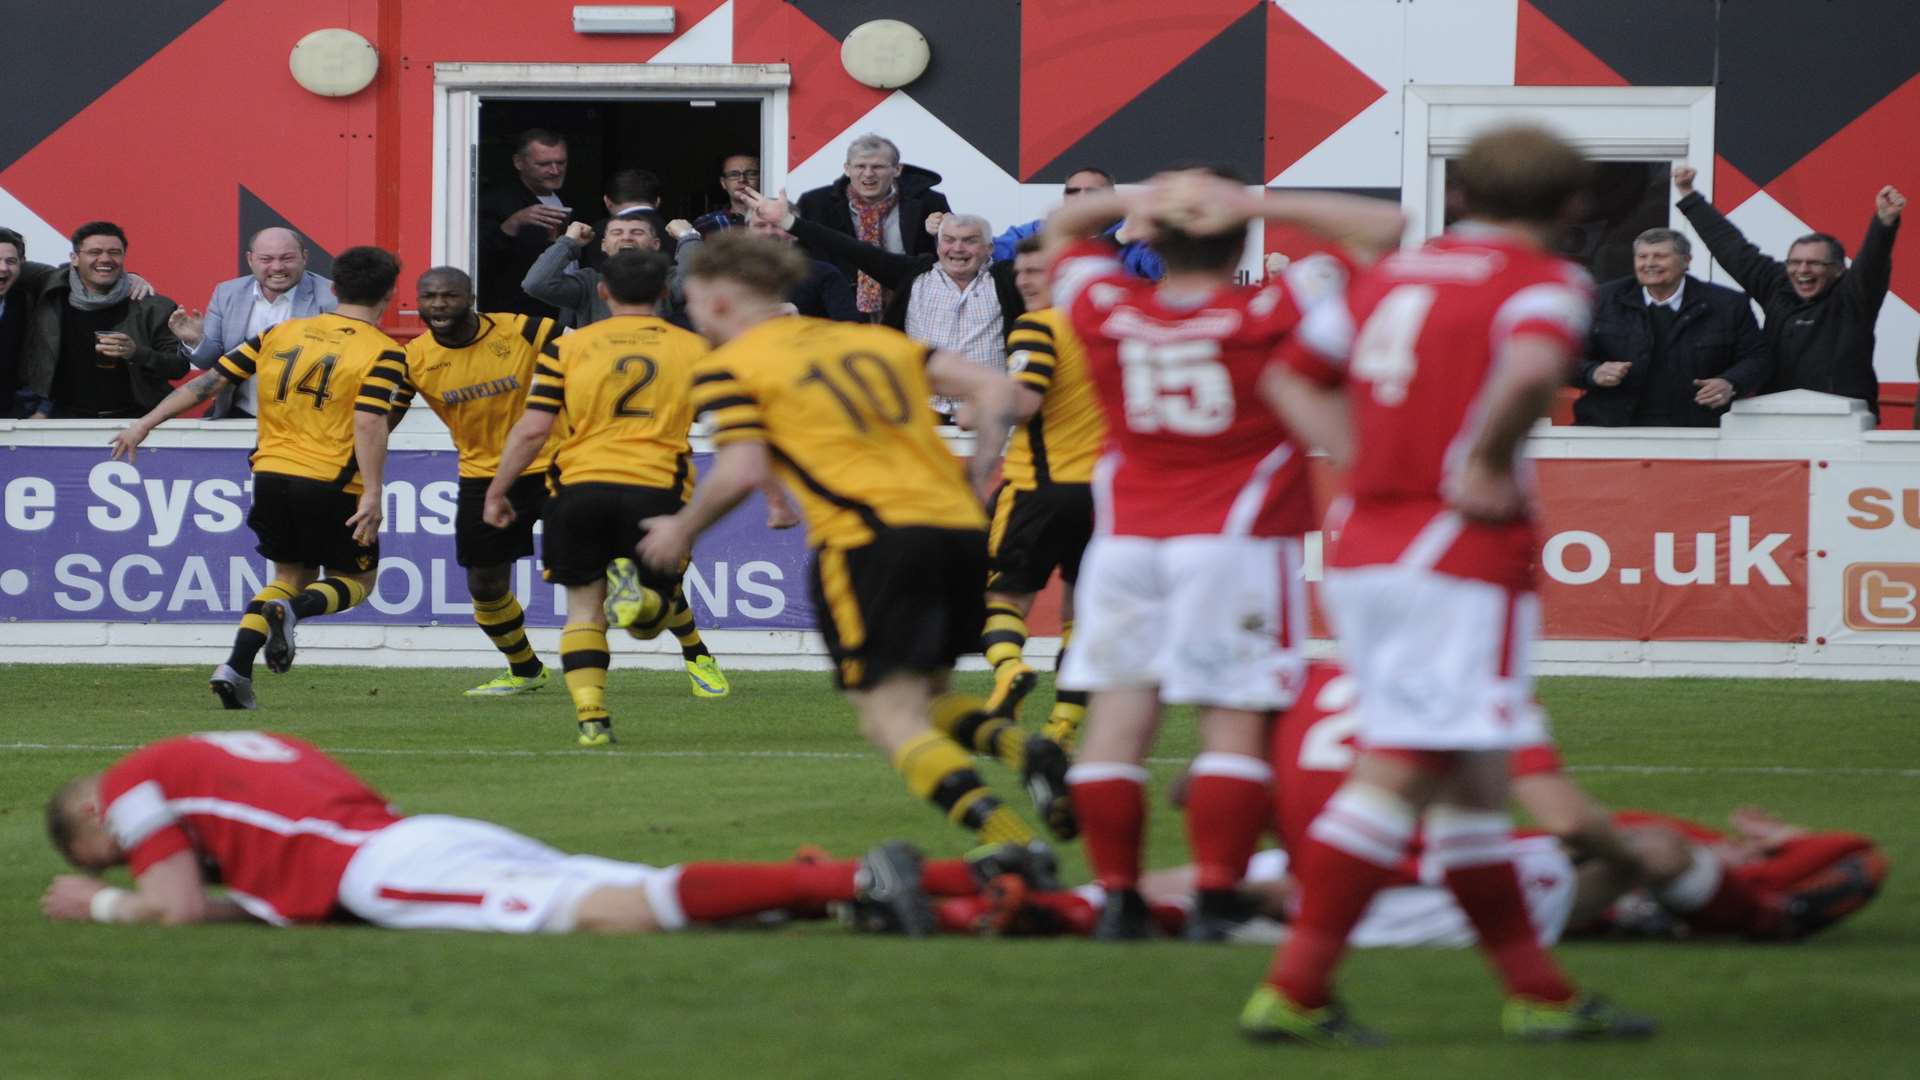 Stuart Lewis (4) can't believe it as Maidstone make it 2-2 in the play-off final Picture: Gary Browne